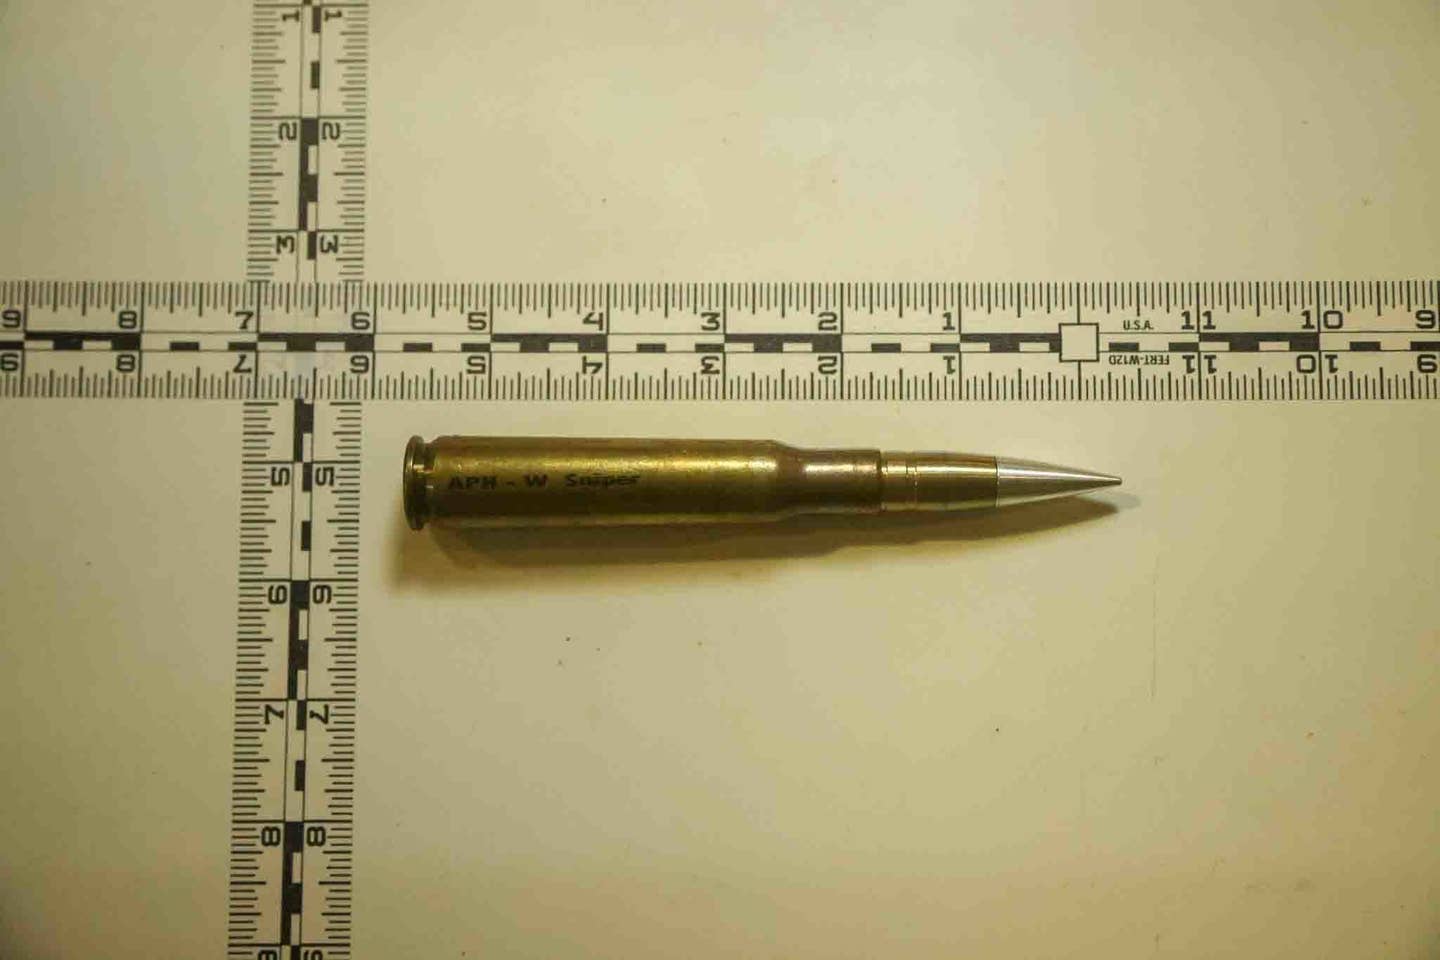 A 12.7x99mm round that was captured as part of the operation on December 1, 2022. <em>USN</em>